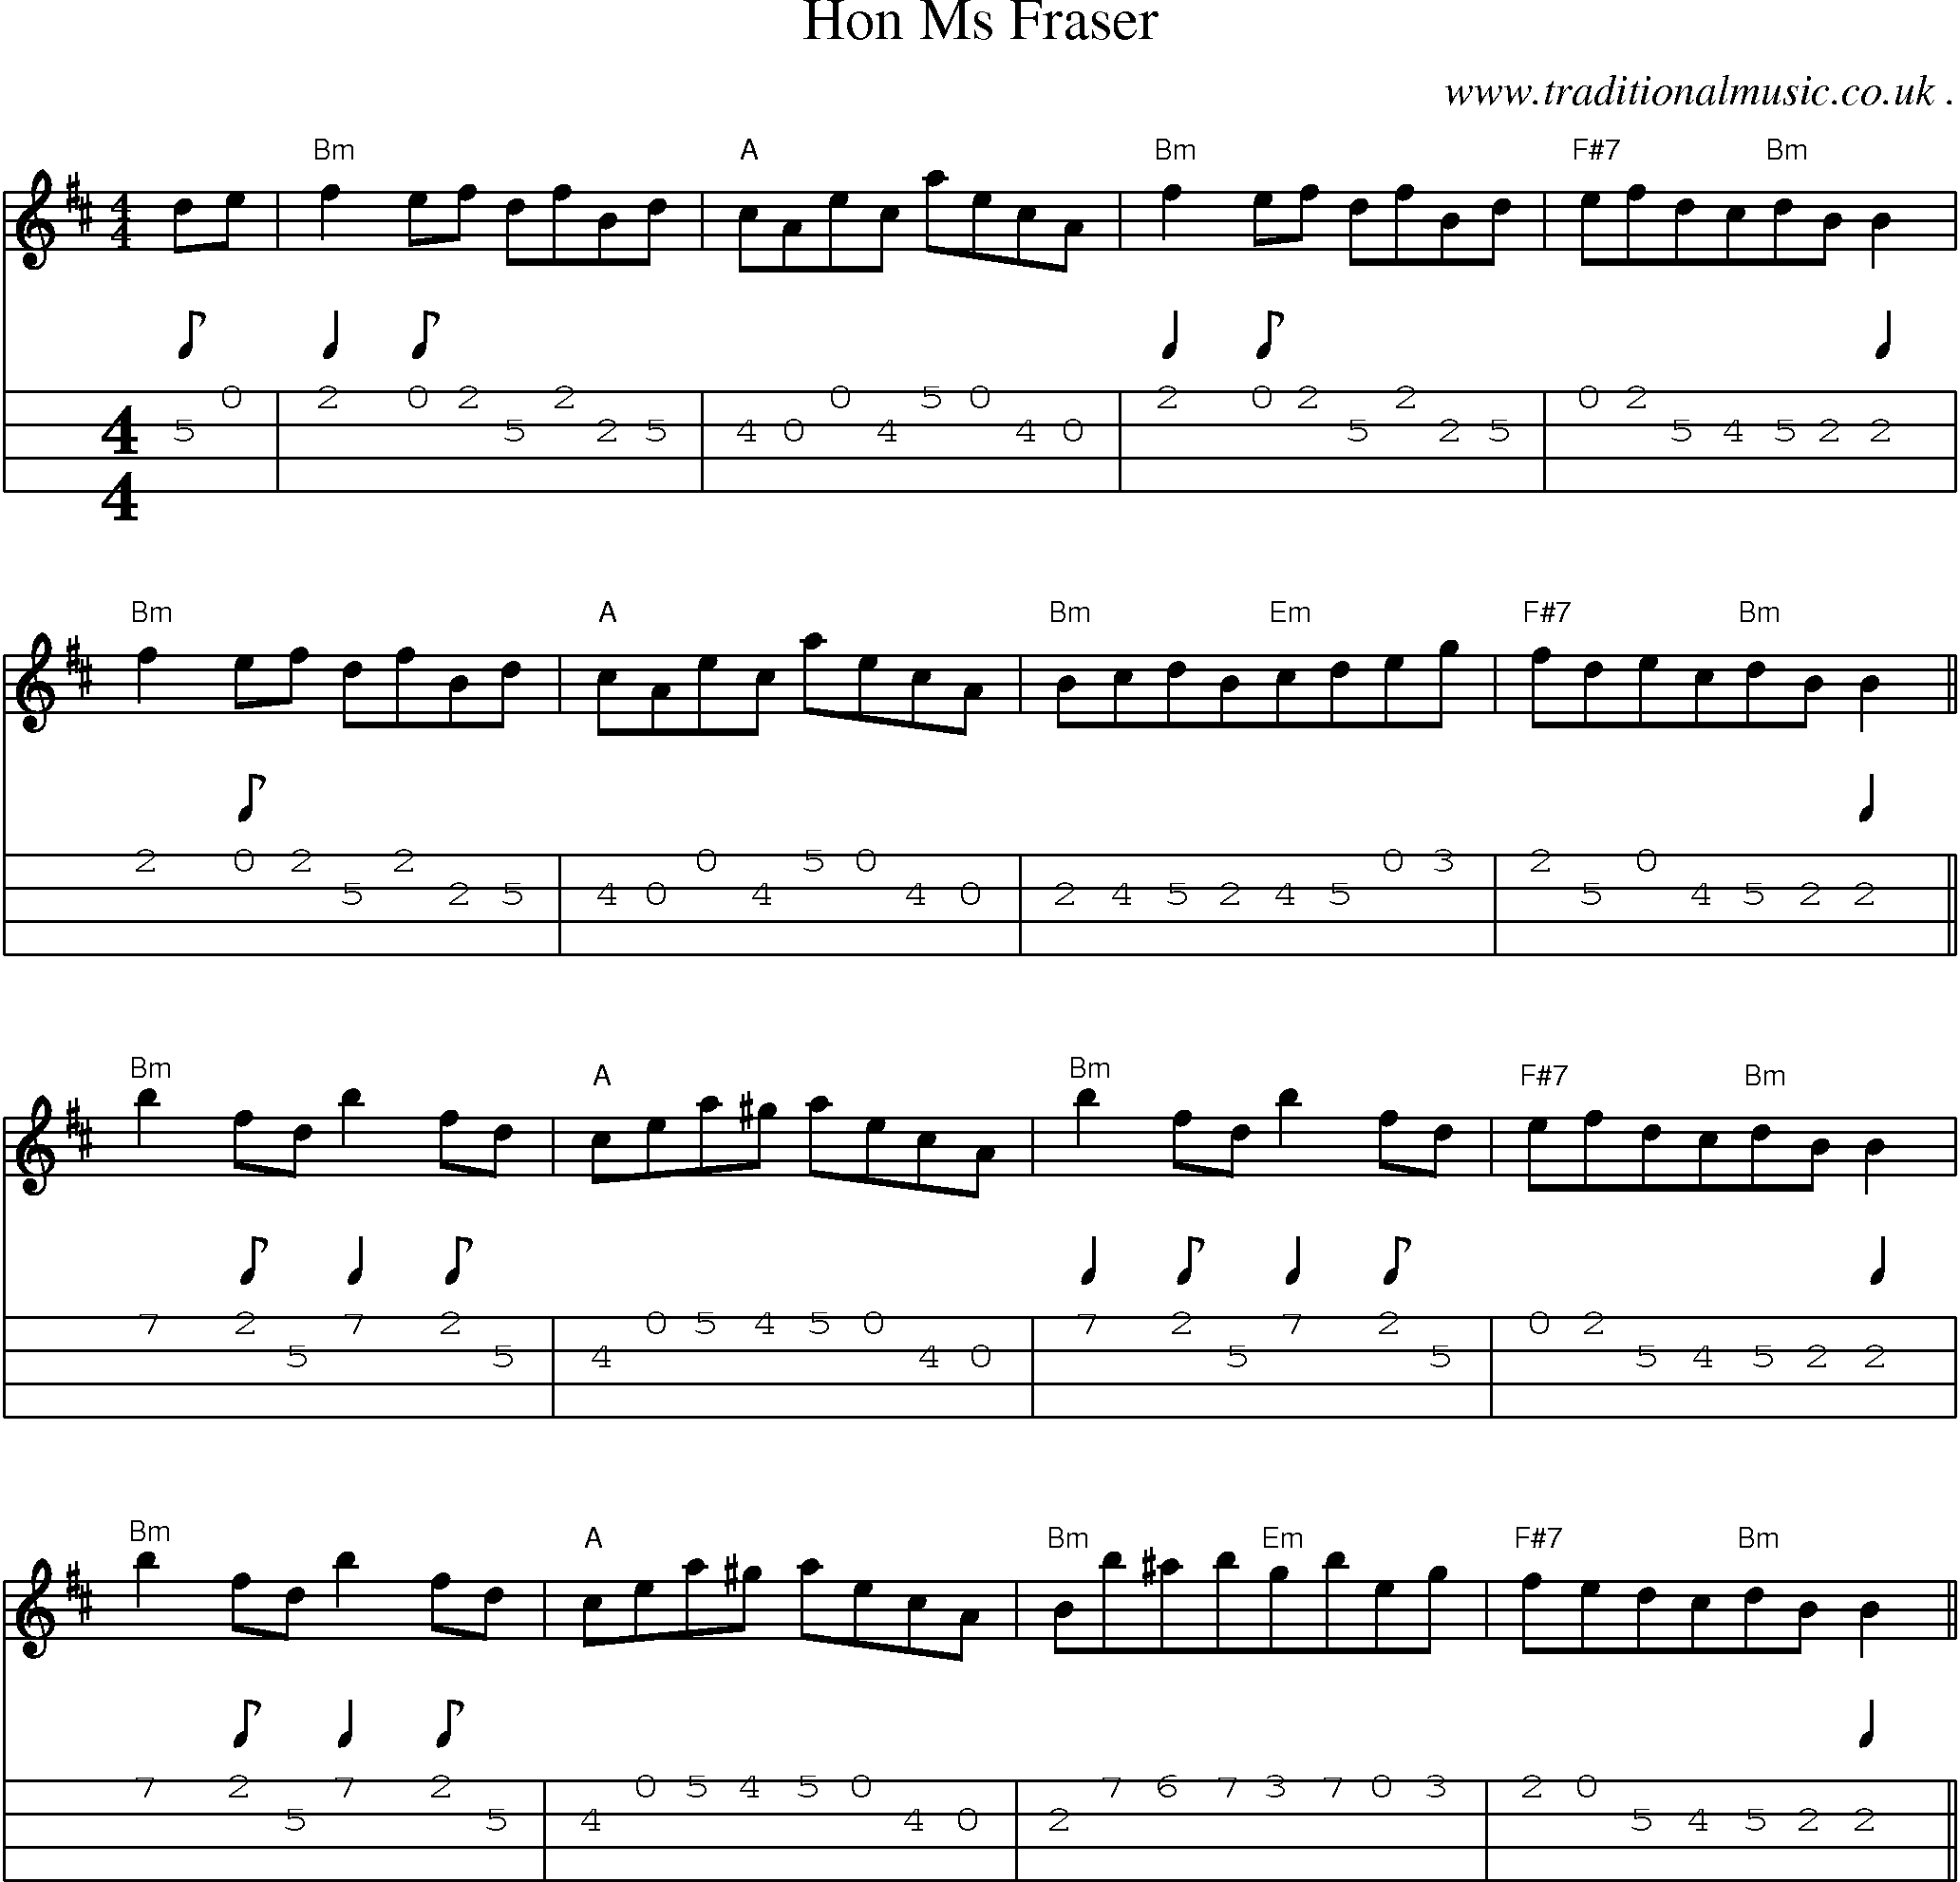 Sheet-Music and Mandolin Tabs for Hon Ms Fraser